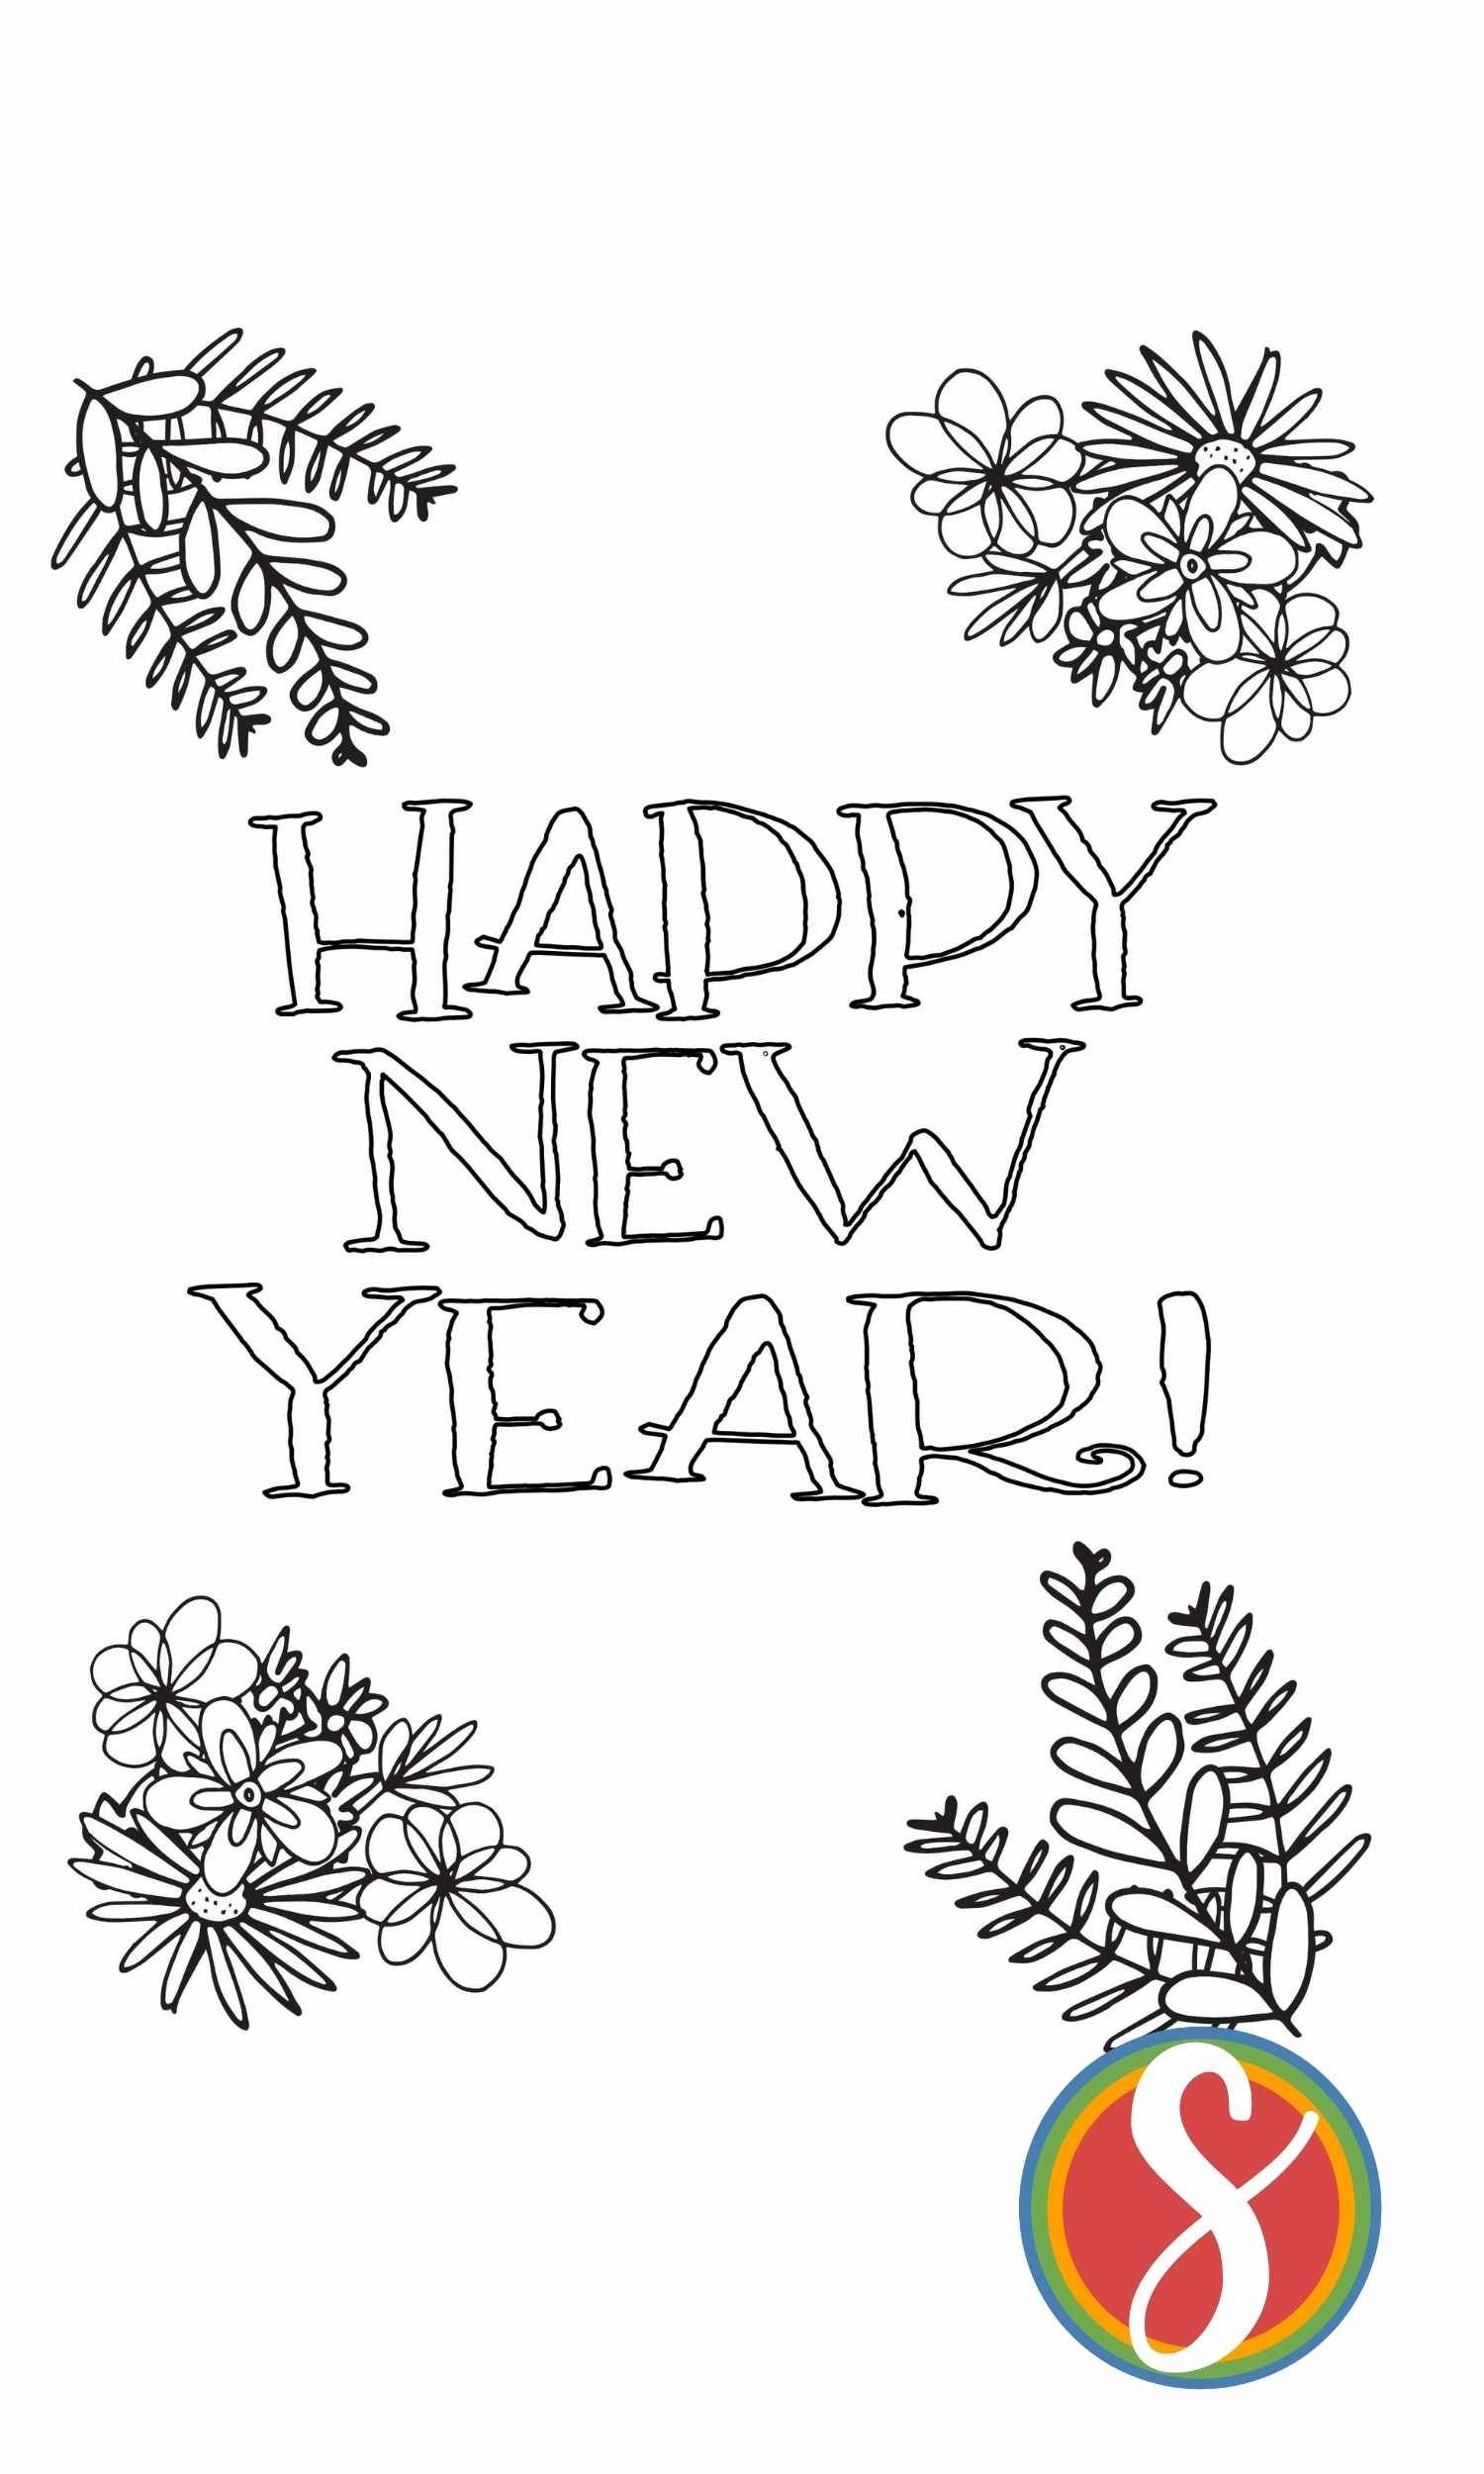 small bunch of colorable flowers in each corner, colorable text "Happy New Year" in the center